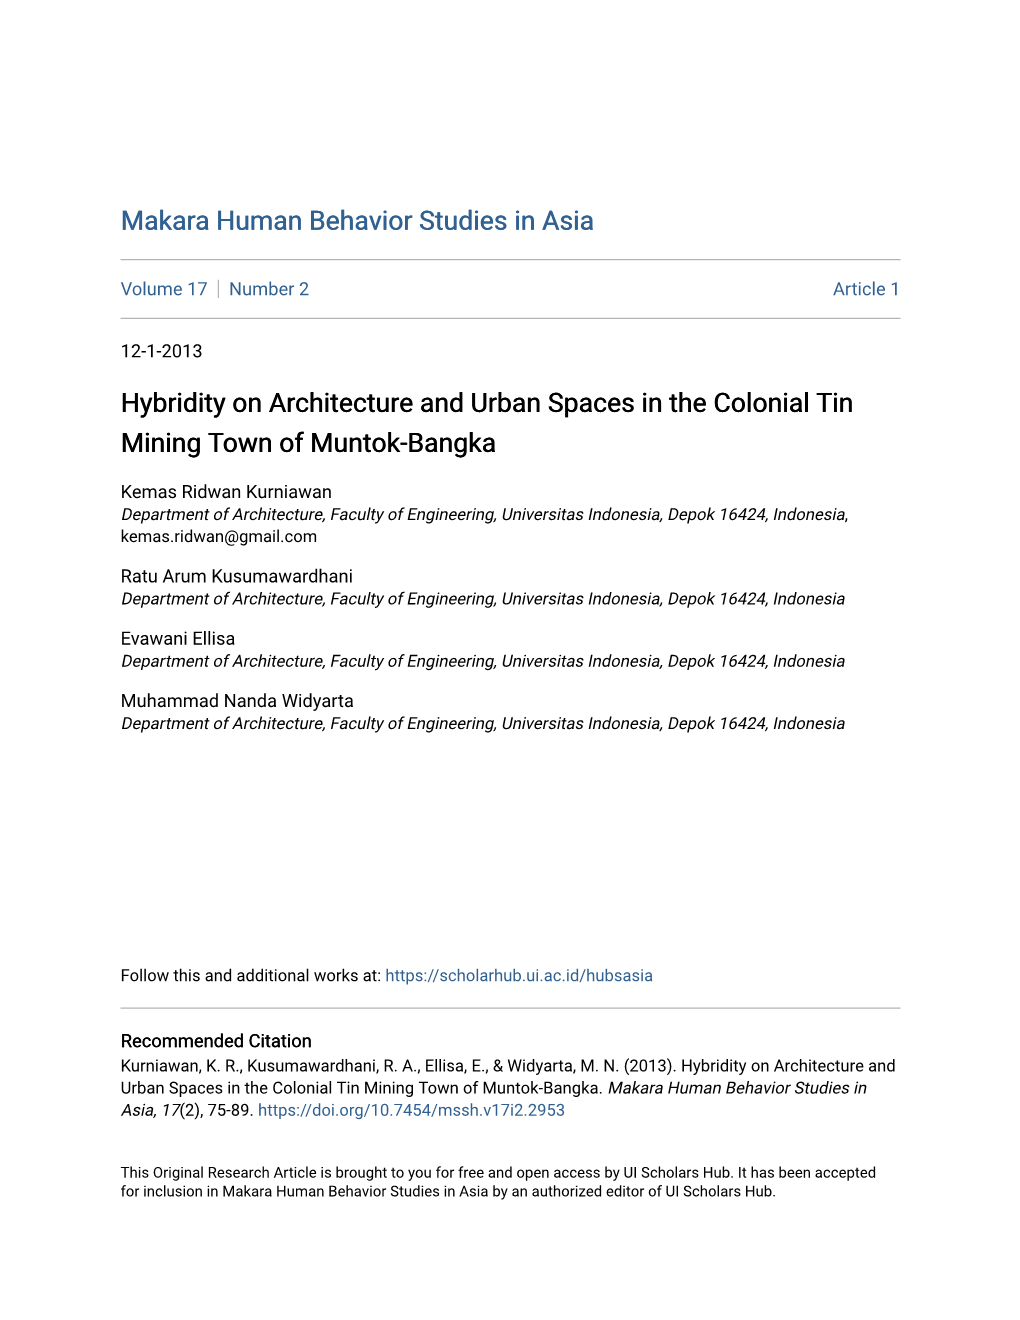 Hybridity on Architecture and Urban Spaces in the Colonial Tin Mining Town of Muntok-Bangka